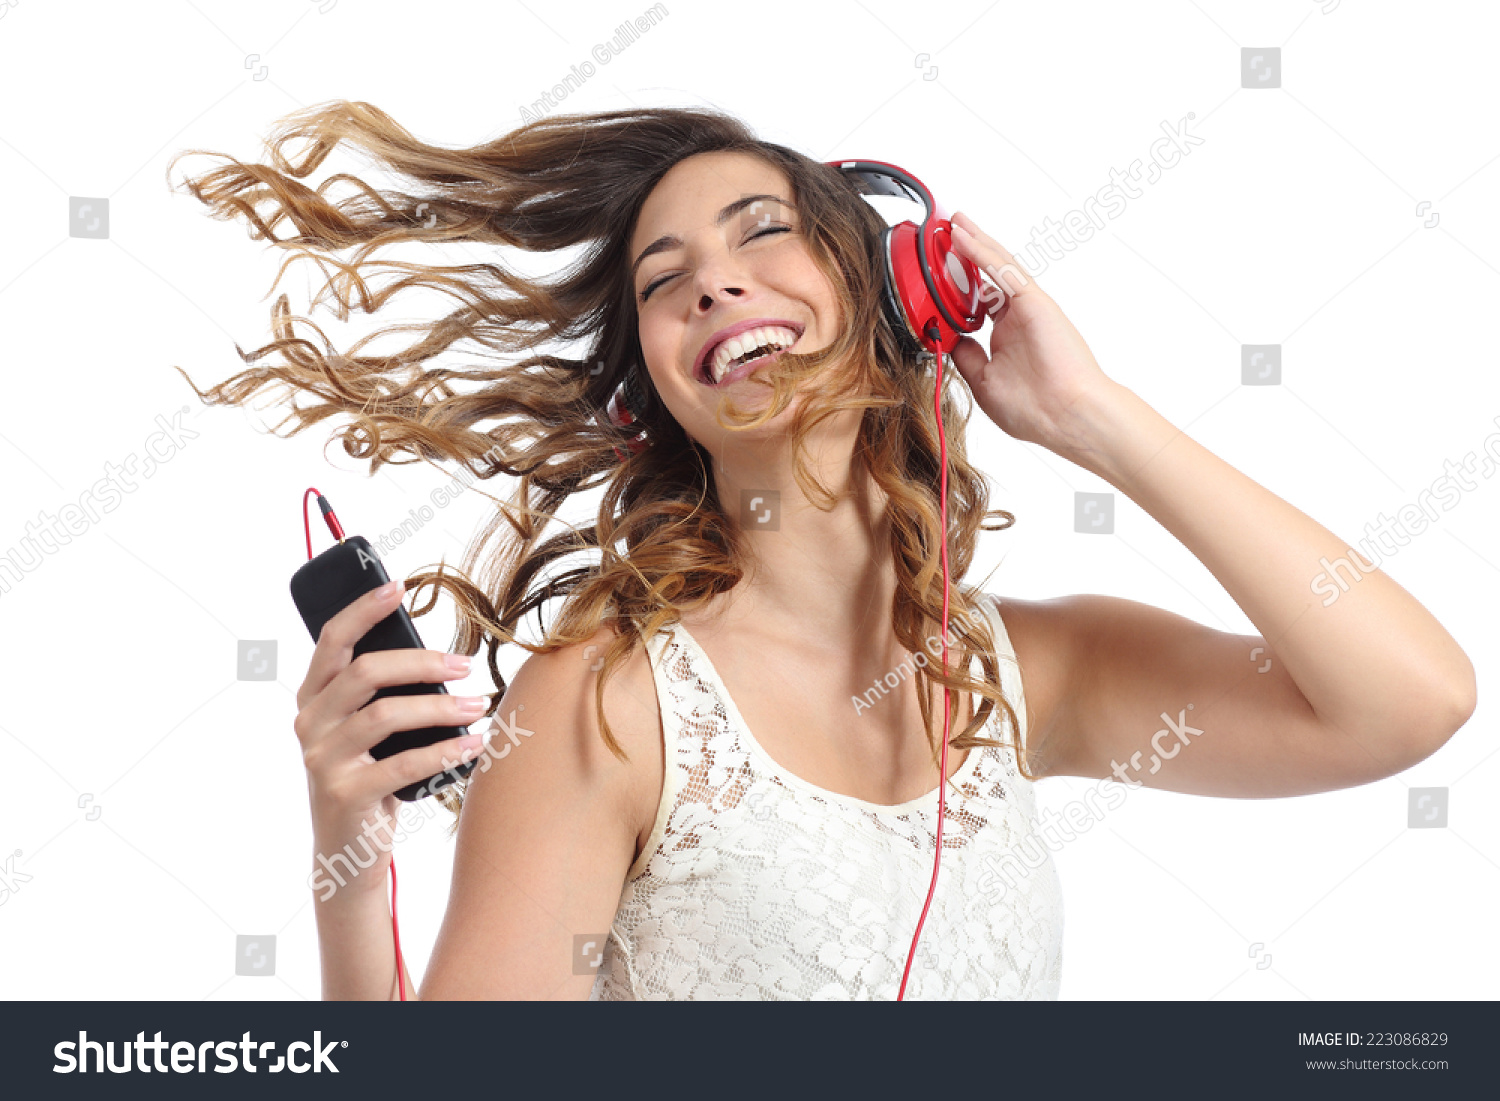 Happy girl dancing and listening to the music isolated on a white background #223086829